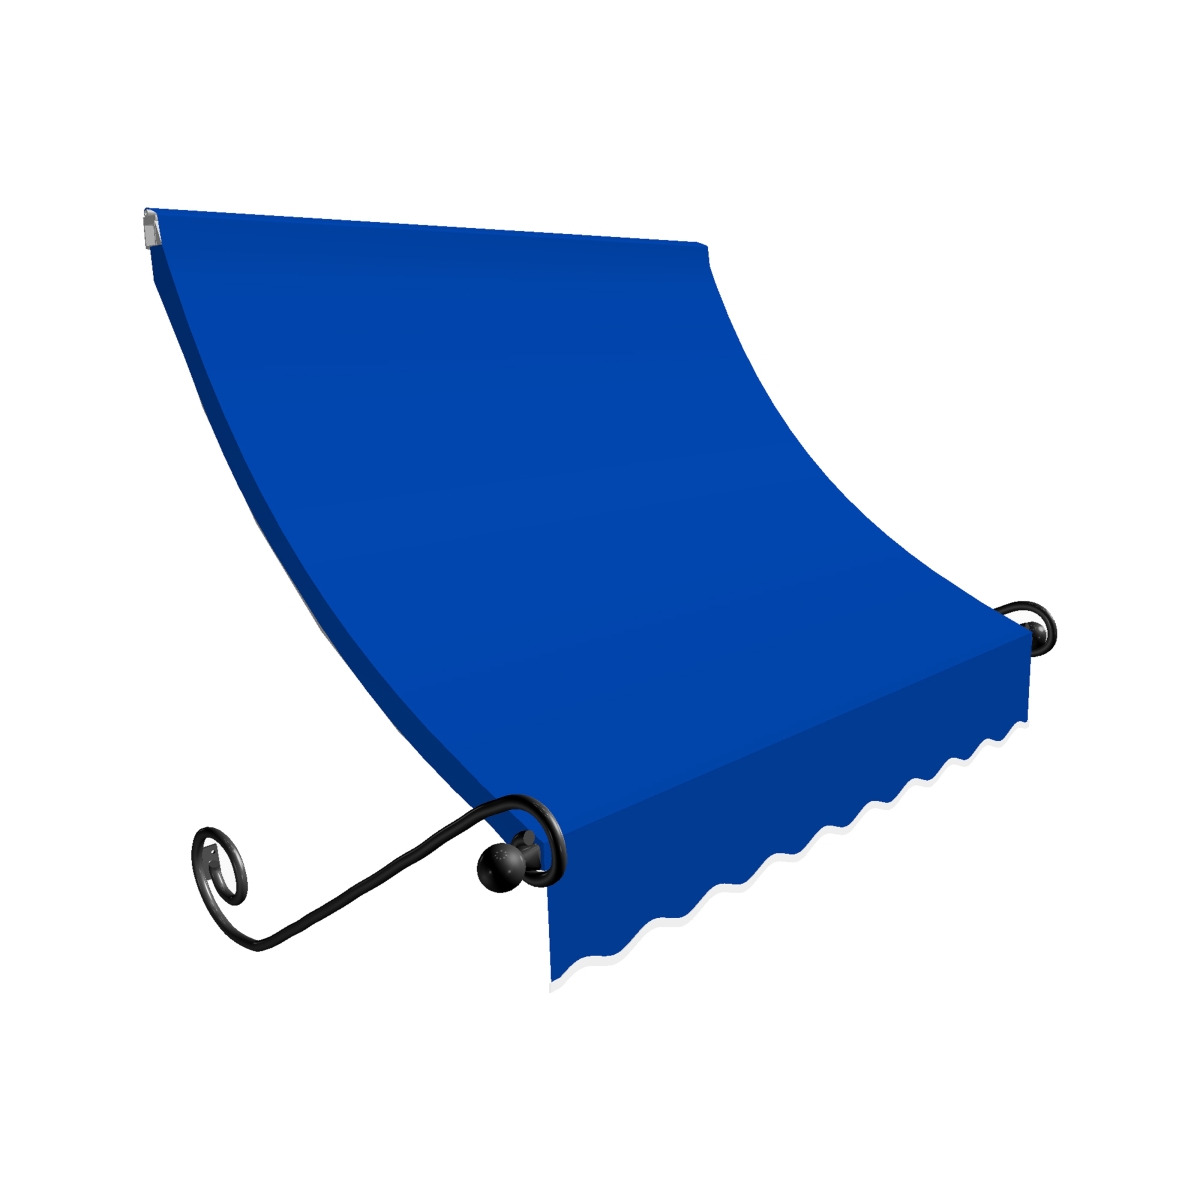 Ch22-us-4bb 4.38 Ft. Charleston Window & Entry Awning, Bright Blue - 31 X 24 In.